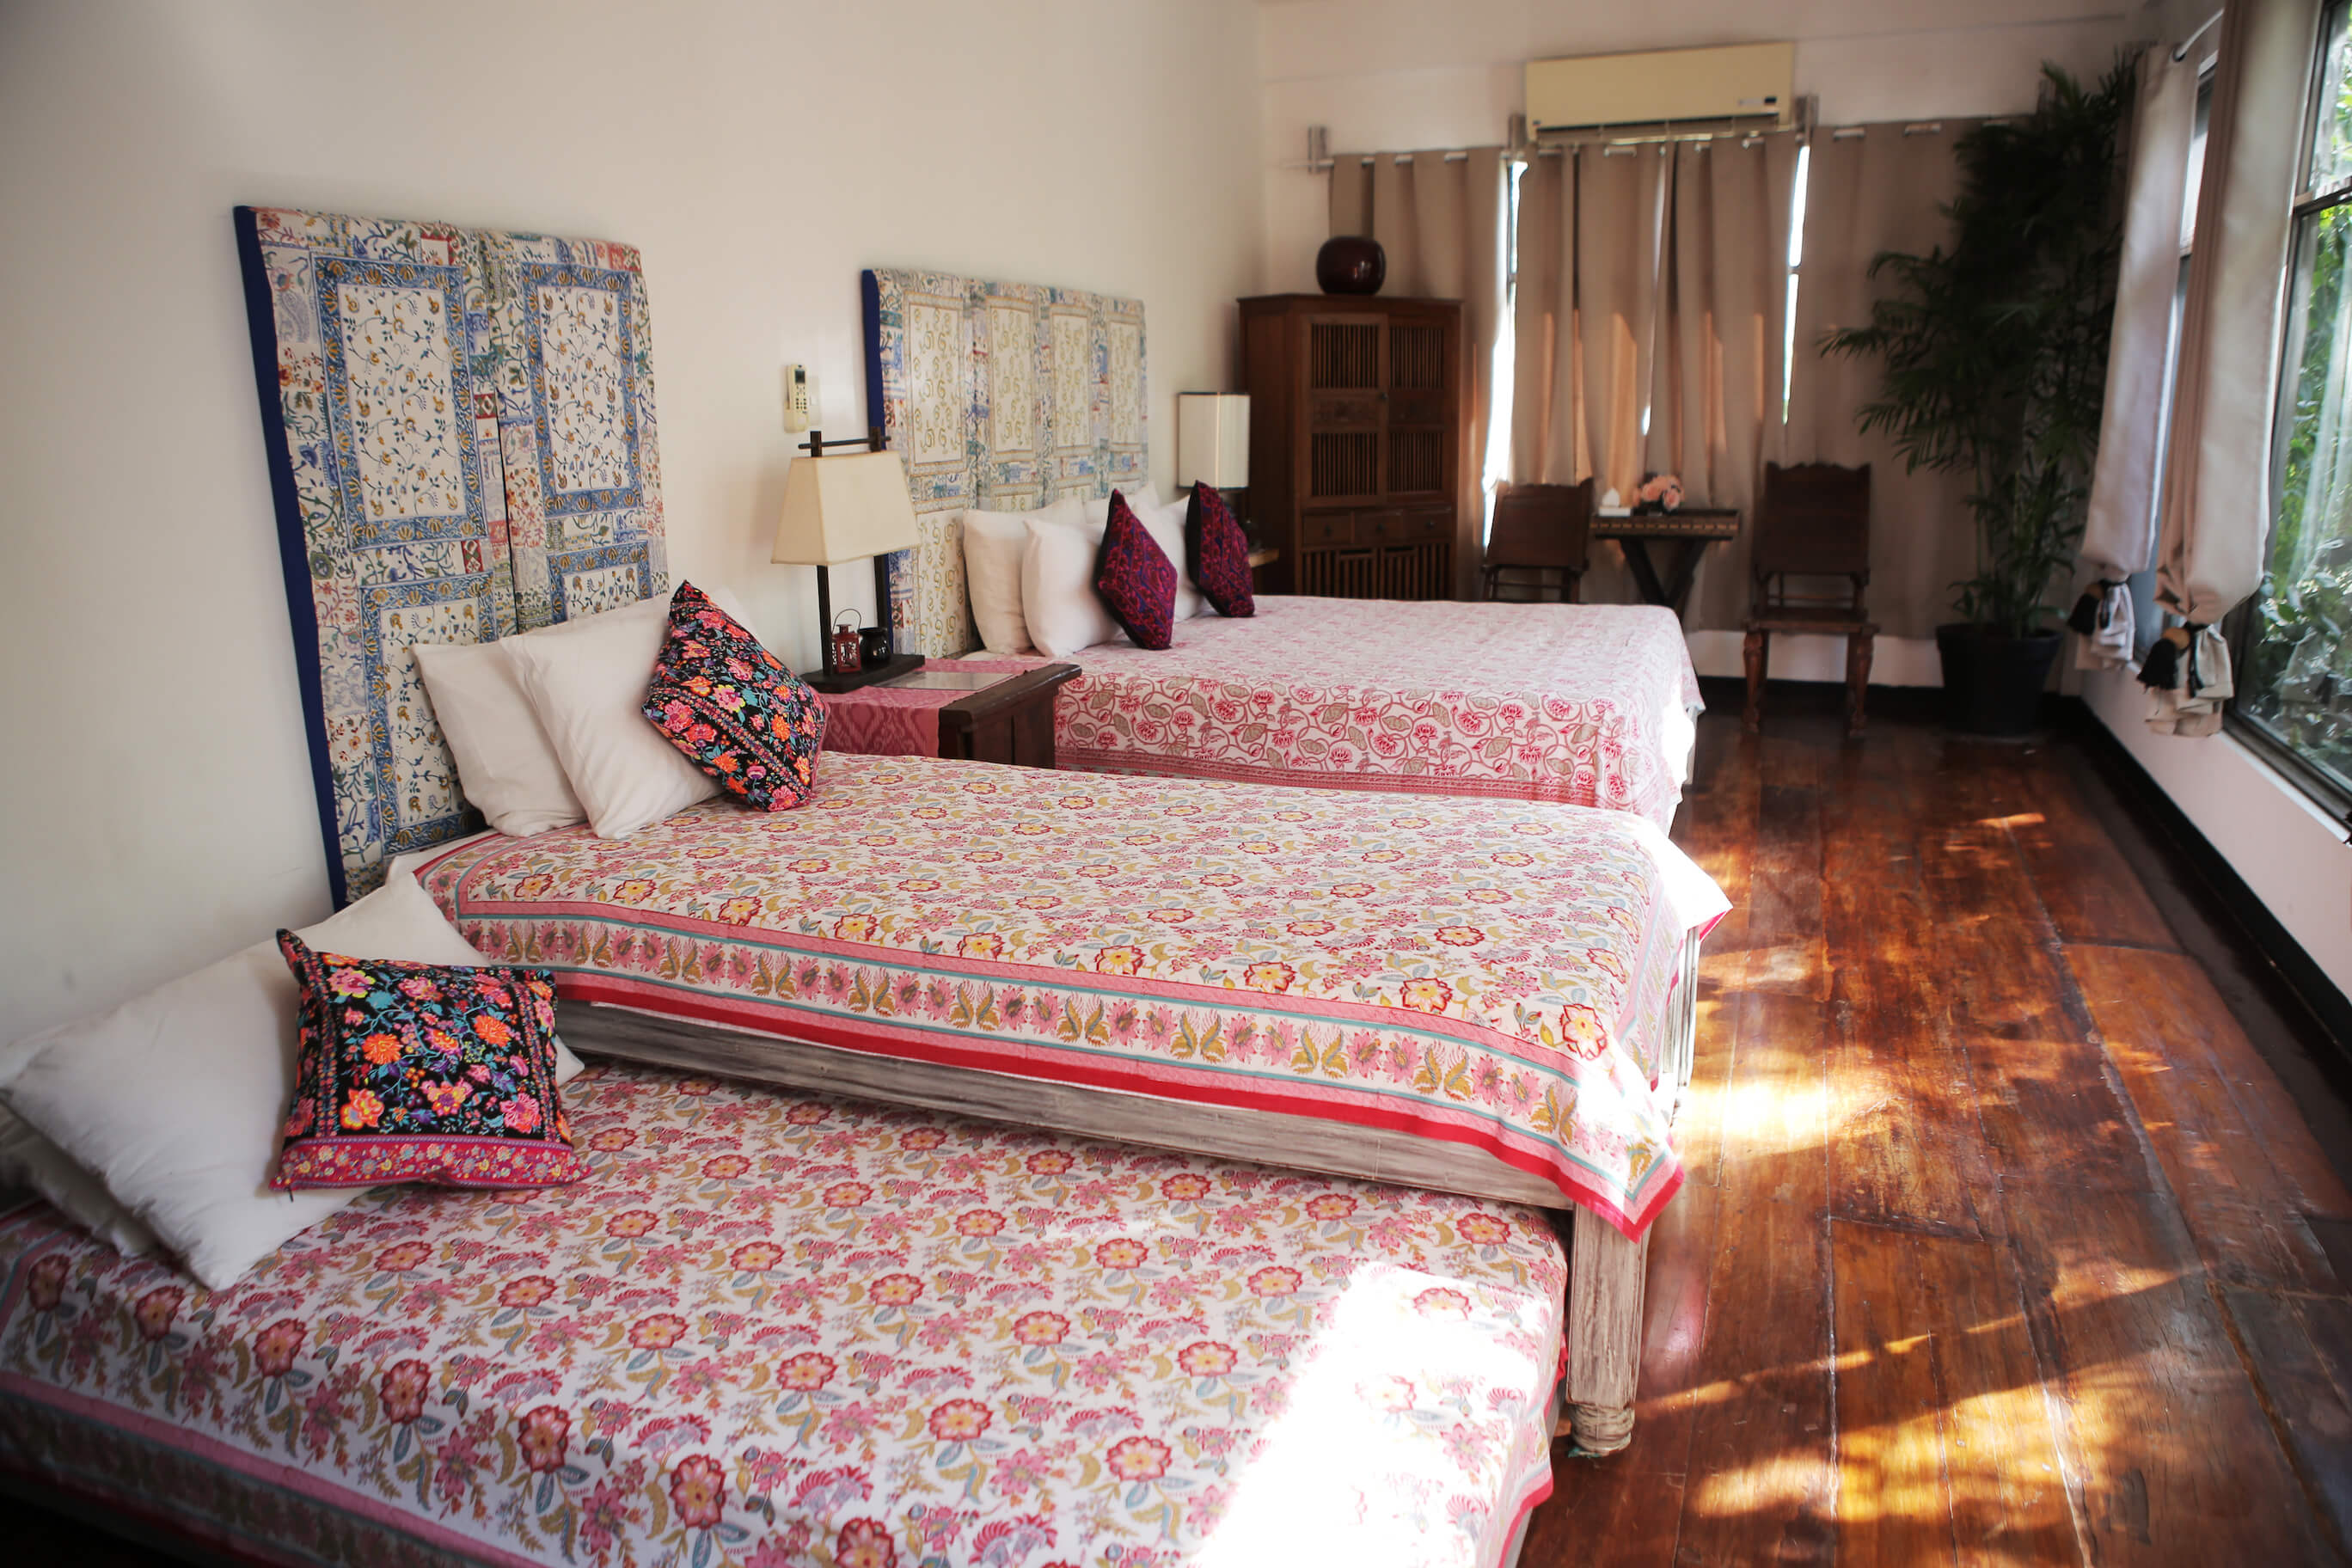 A bedroom with three twin beds made up with colourful floral bedspreads.